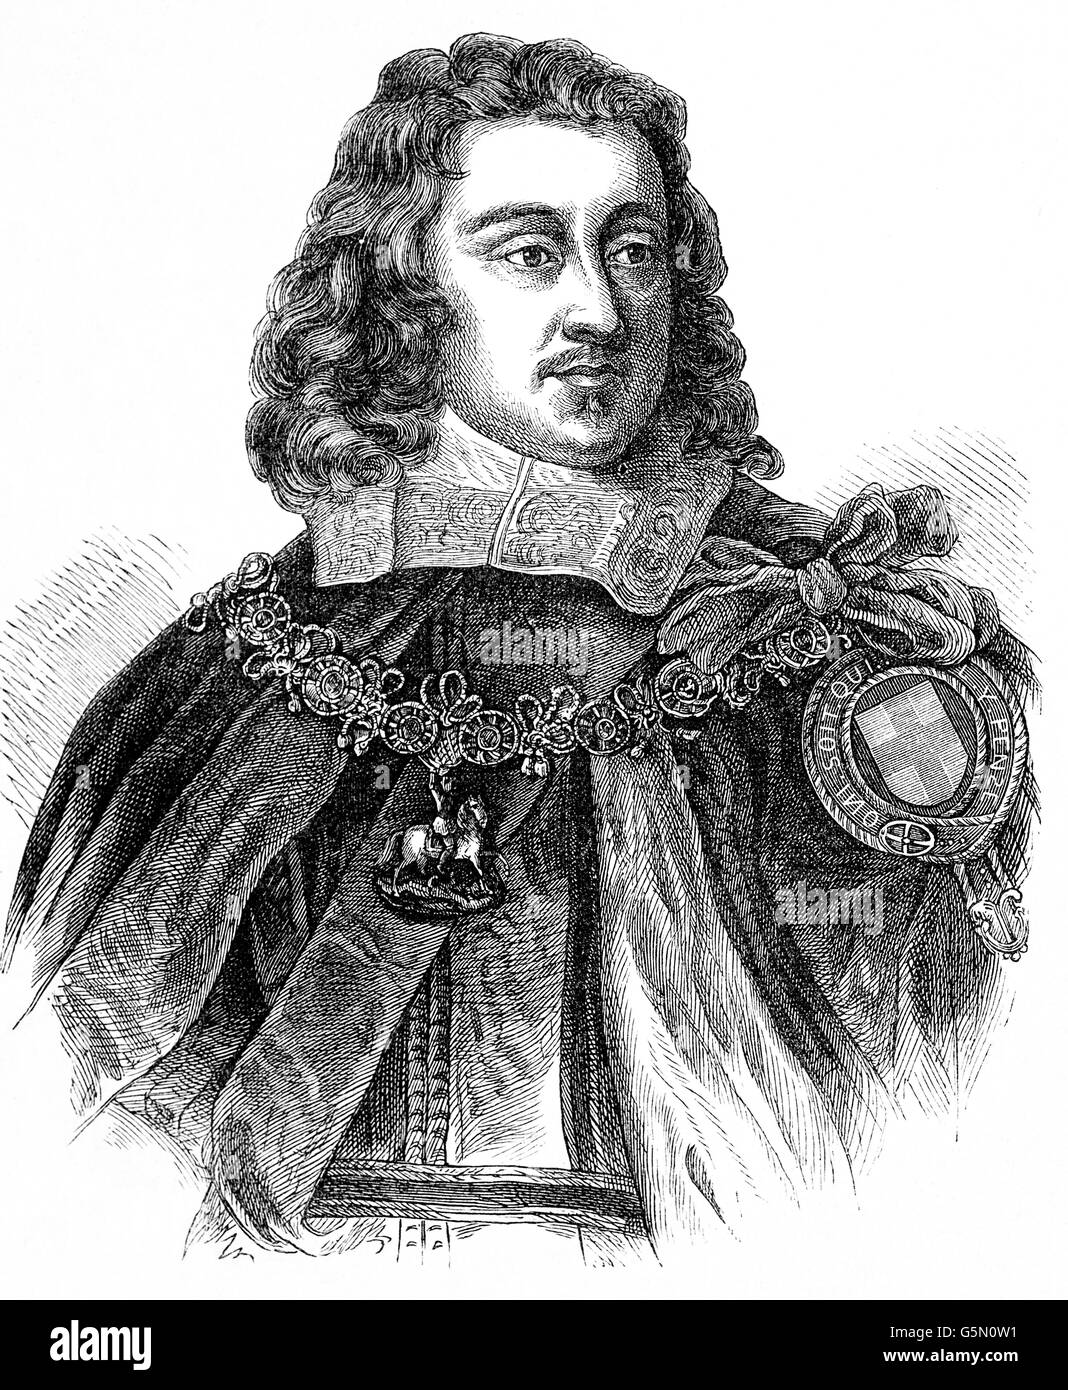 George Monk, 1st Duke of Albemarle, (1608 – 1670) was an English soldier, politician and a key figure in effecting the Restoration of the Monarchy to King Charles II in 1660. Stock Photo